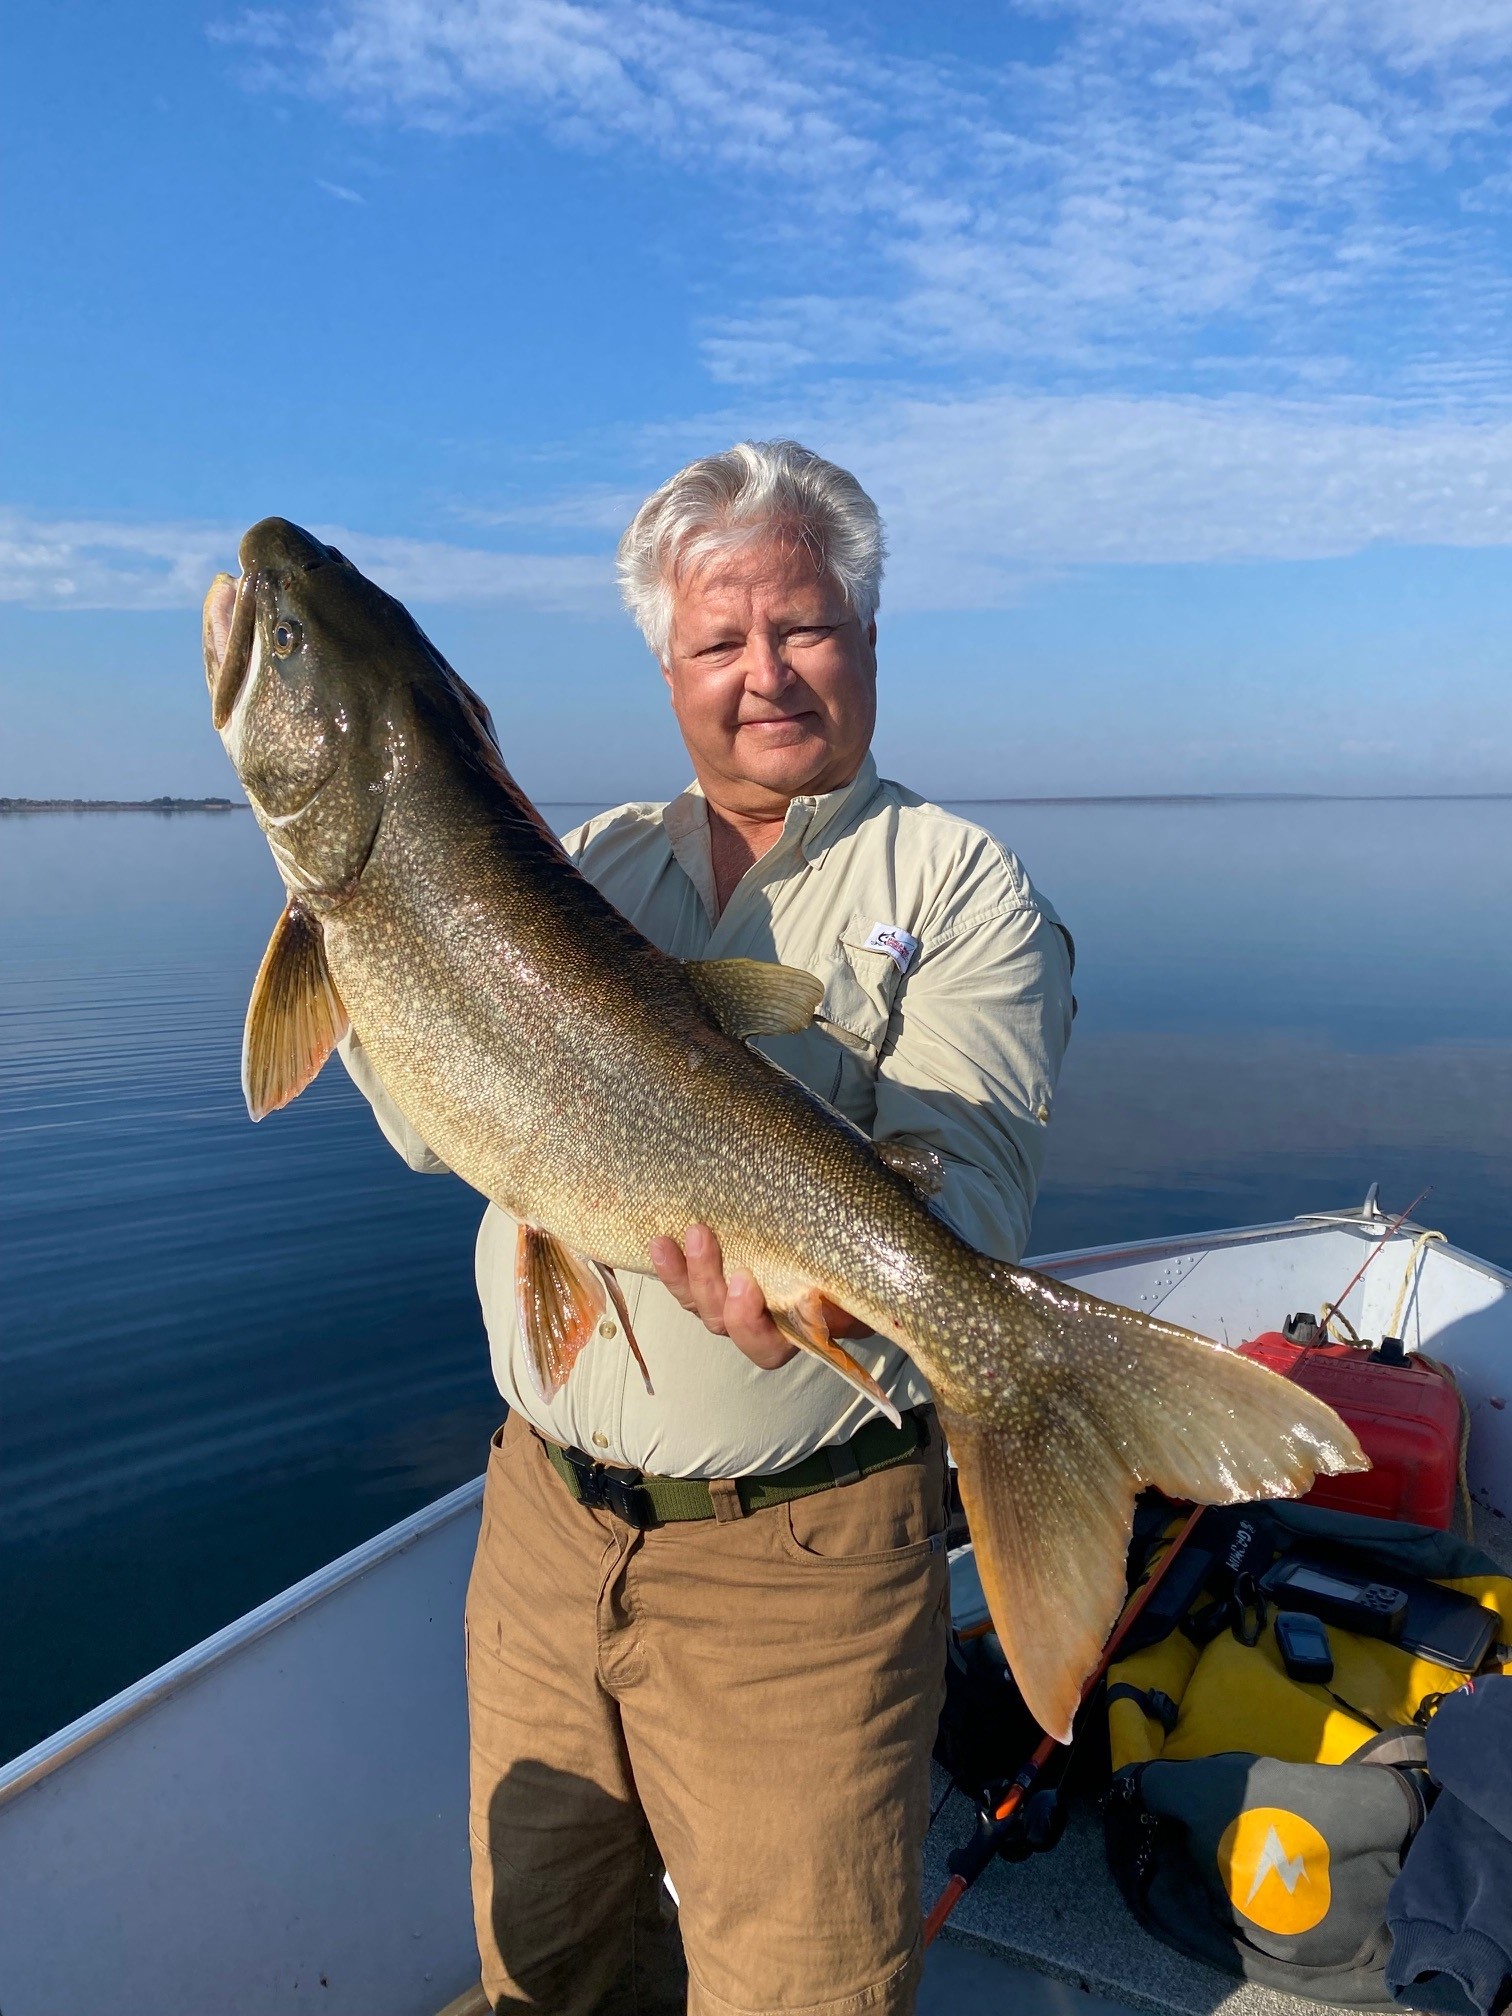 Catch your own Trophy Northern Pike on an All-Inclusive Canada